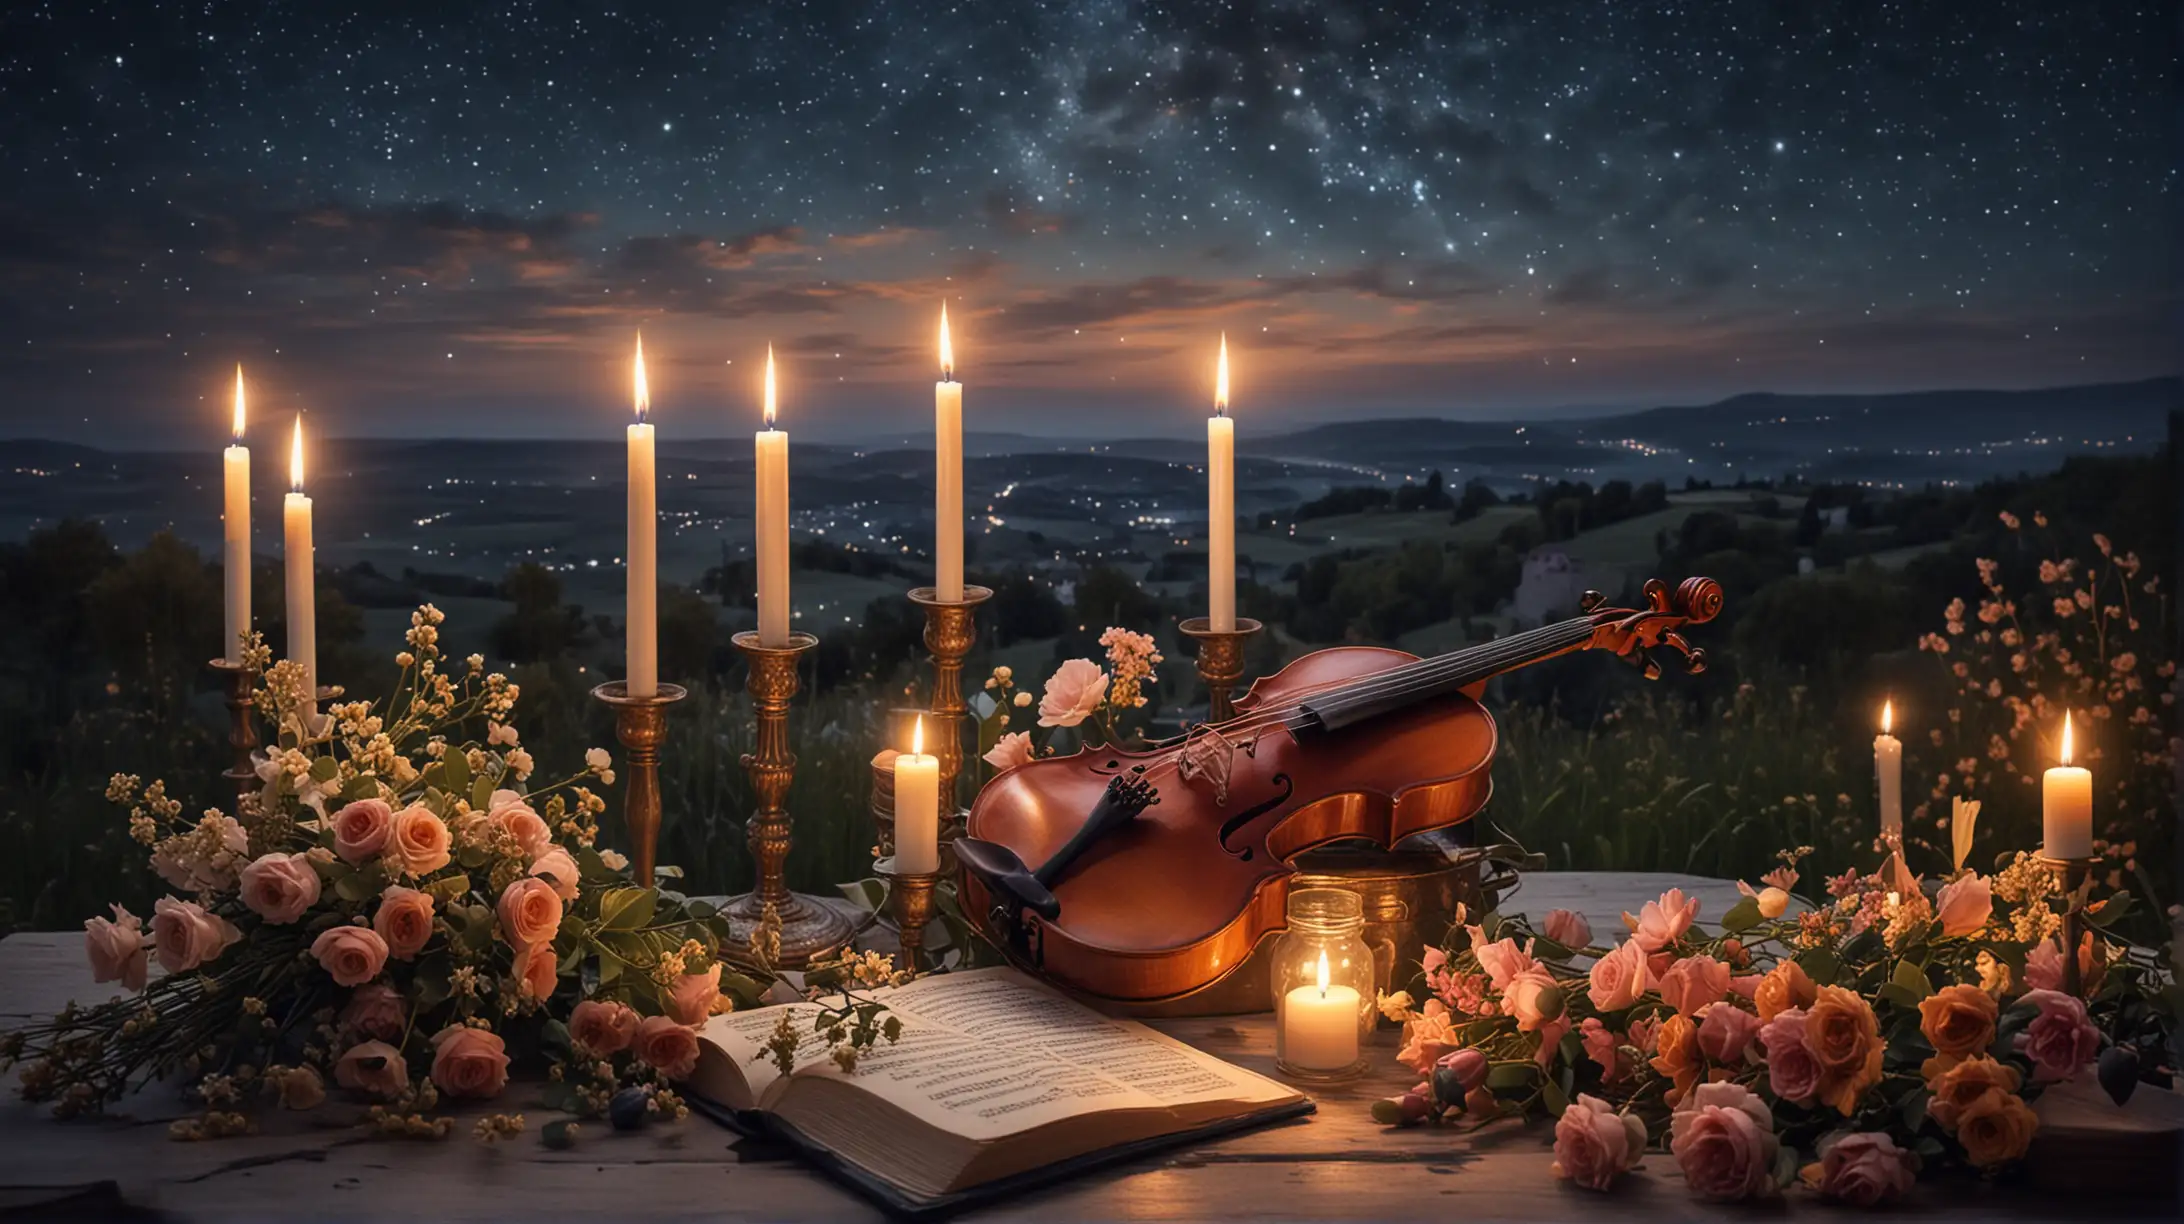 Romantic Evening with Candlelit Serenade under Starry Sky